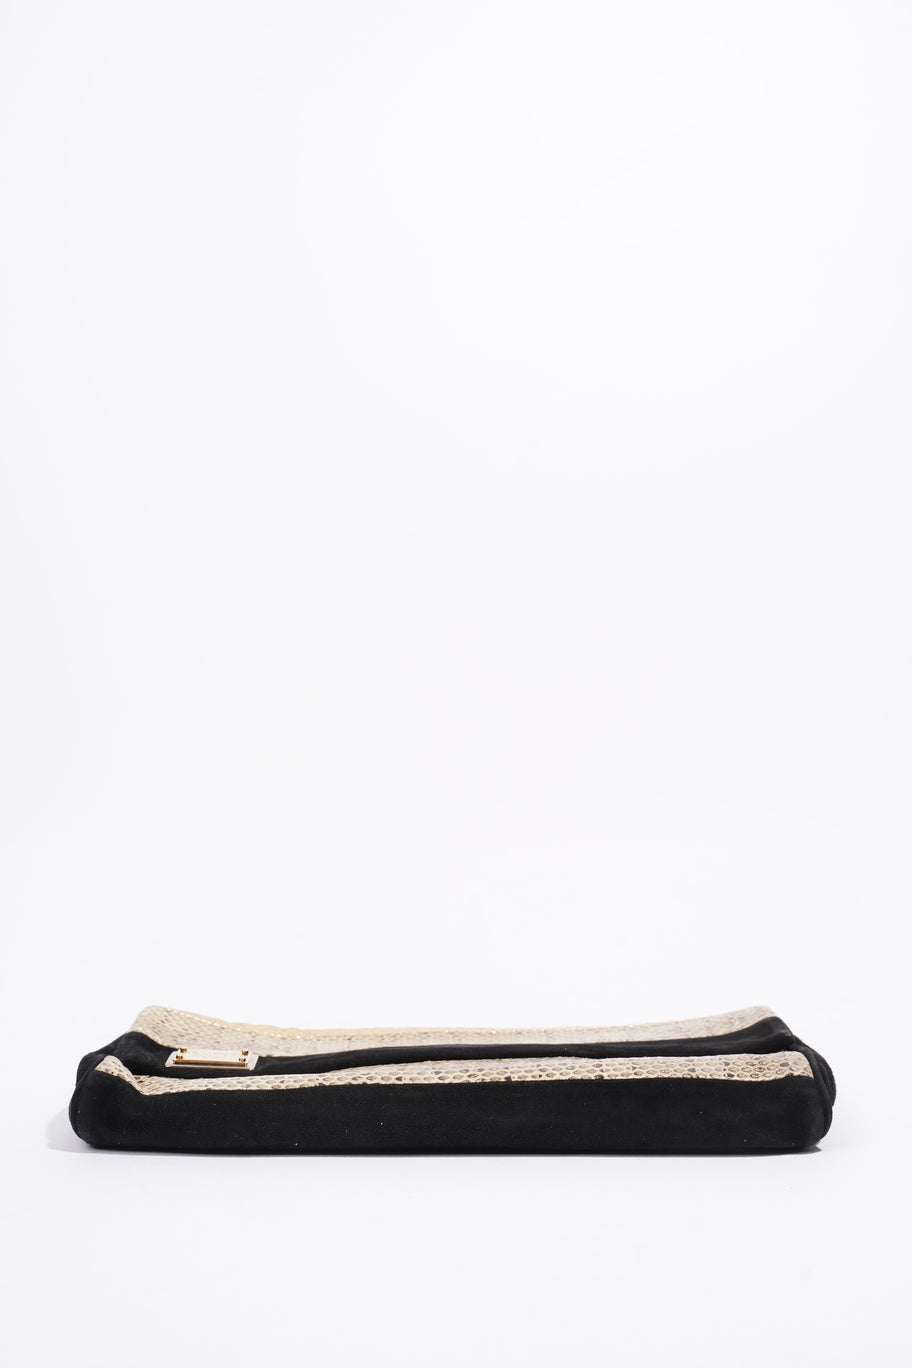 Clutch Bag With Chain Black / Gold Python Image 7